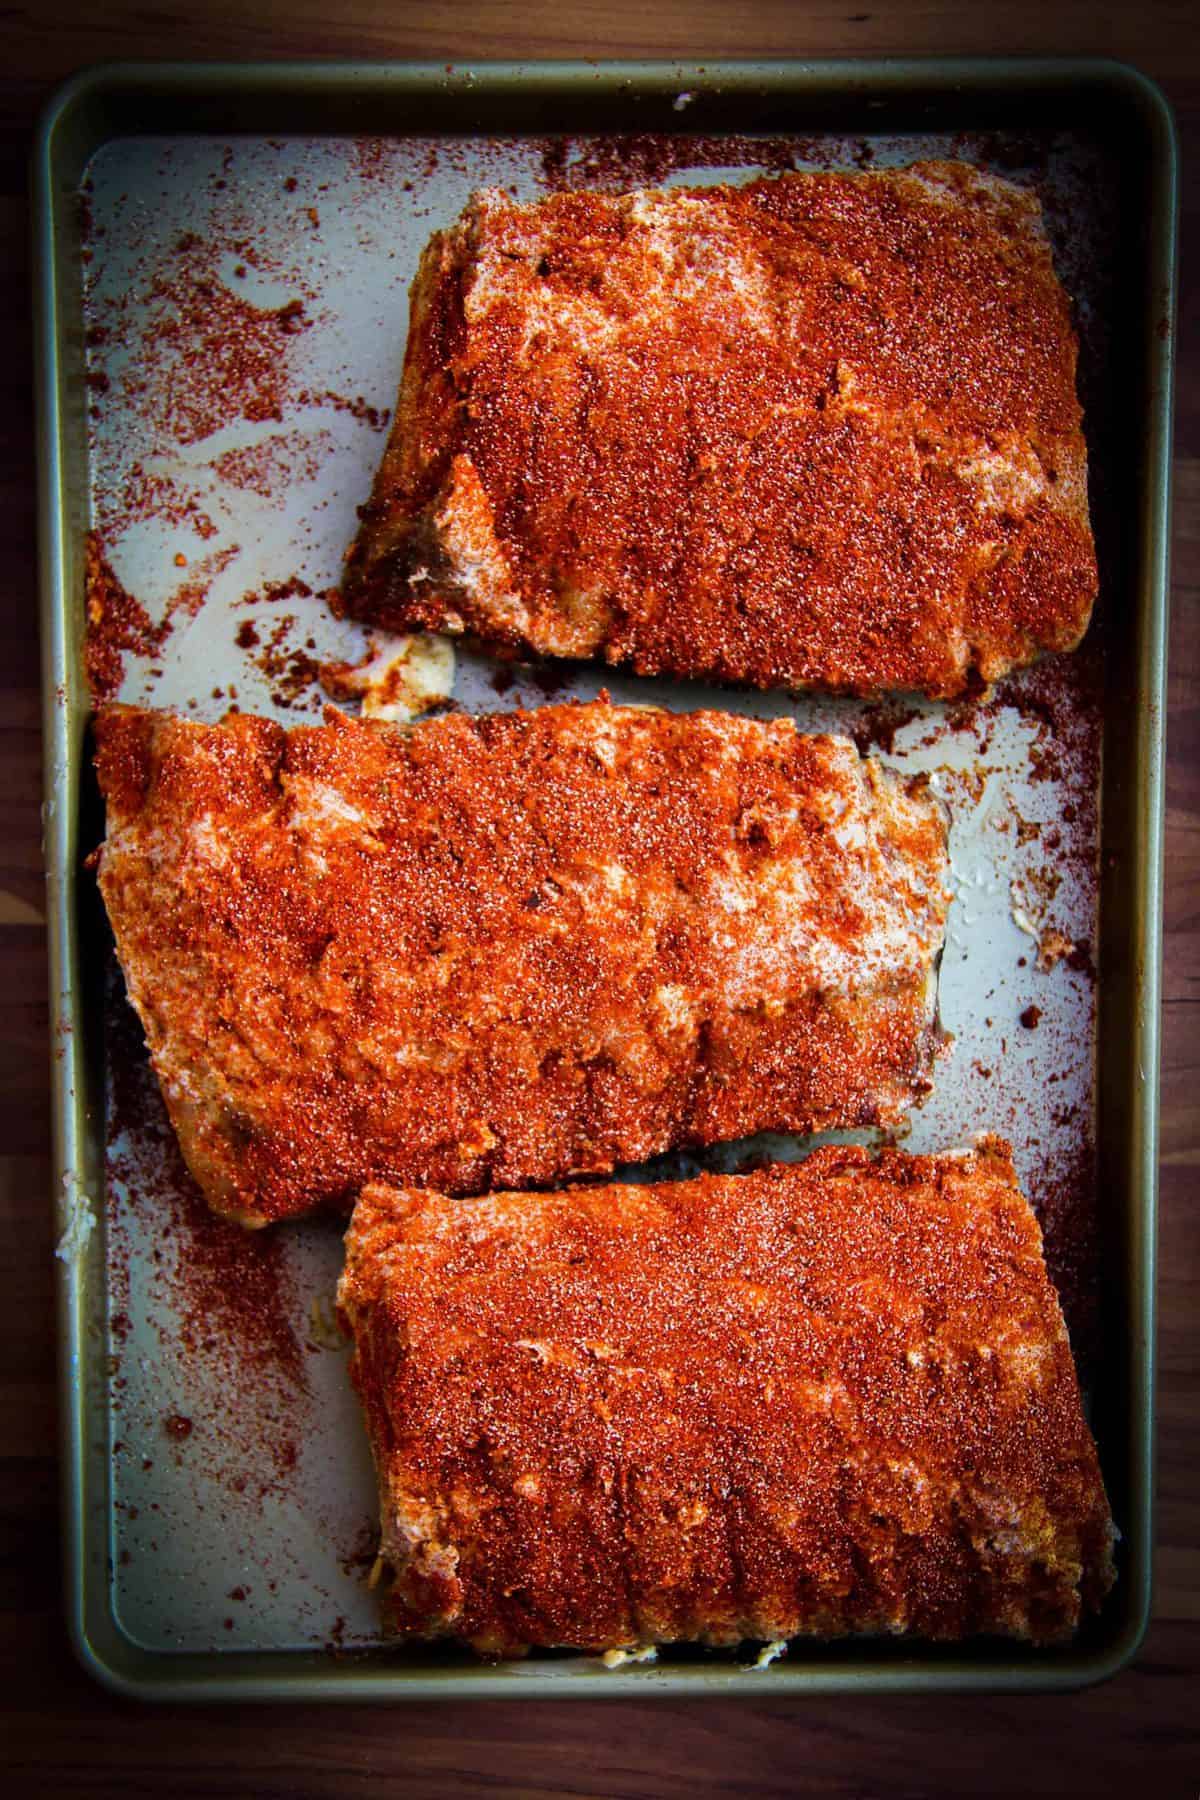 Spicing the ribs up with the secret spice blend.